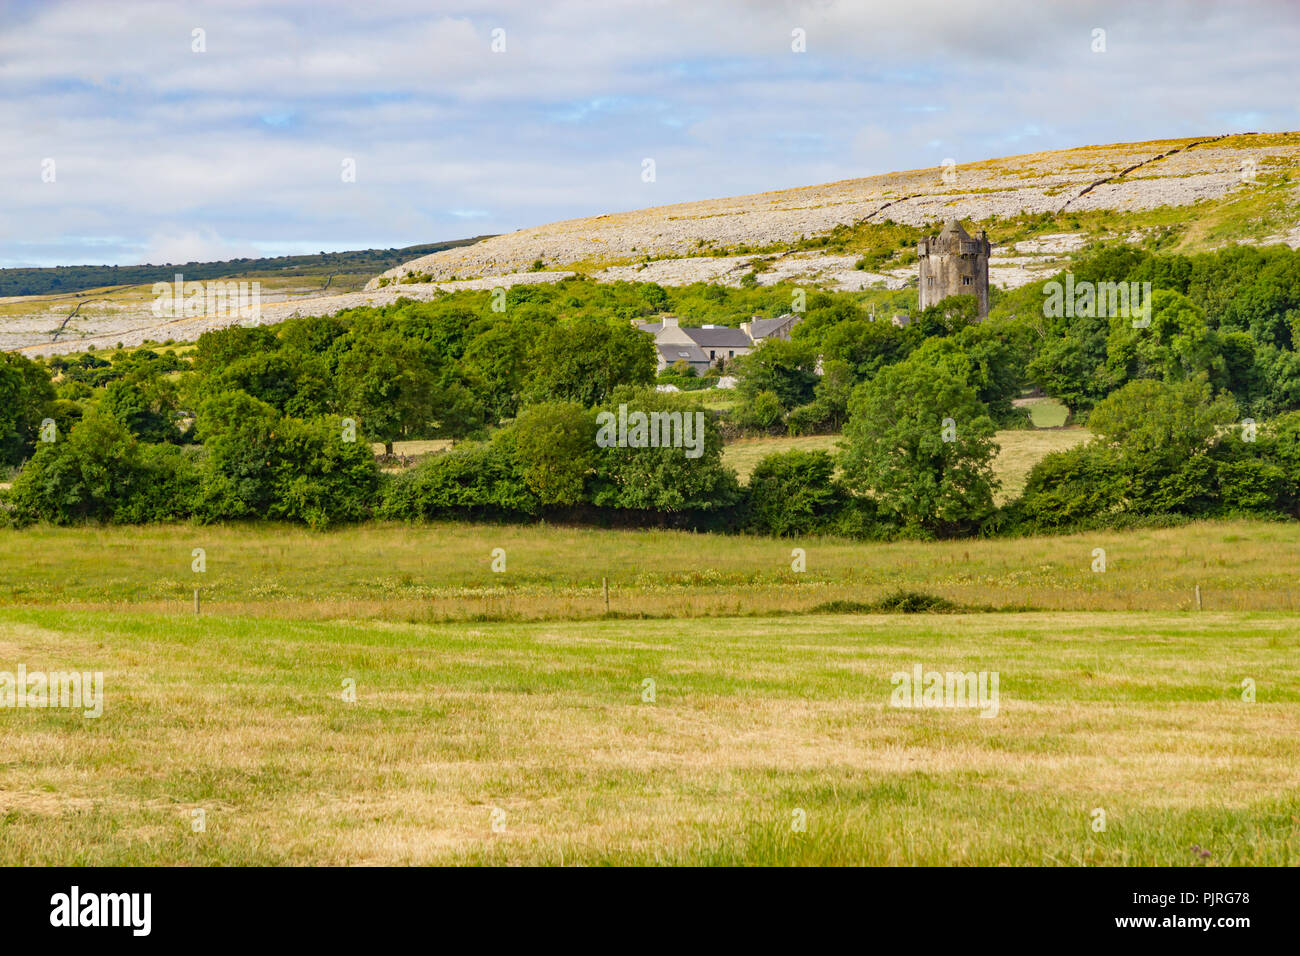 Castle tower with Mountain and vegetation in Ballyvaughan, Ireland Stock Photo